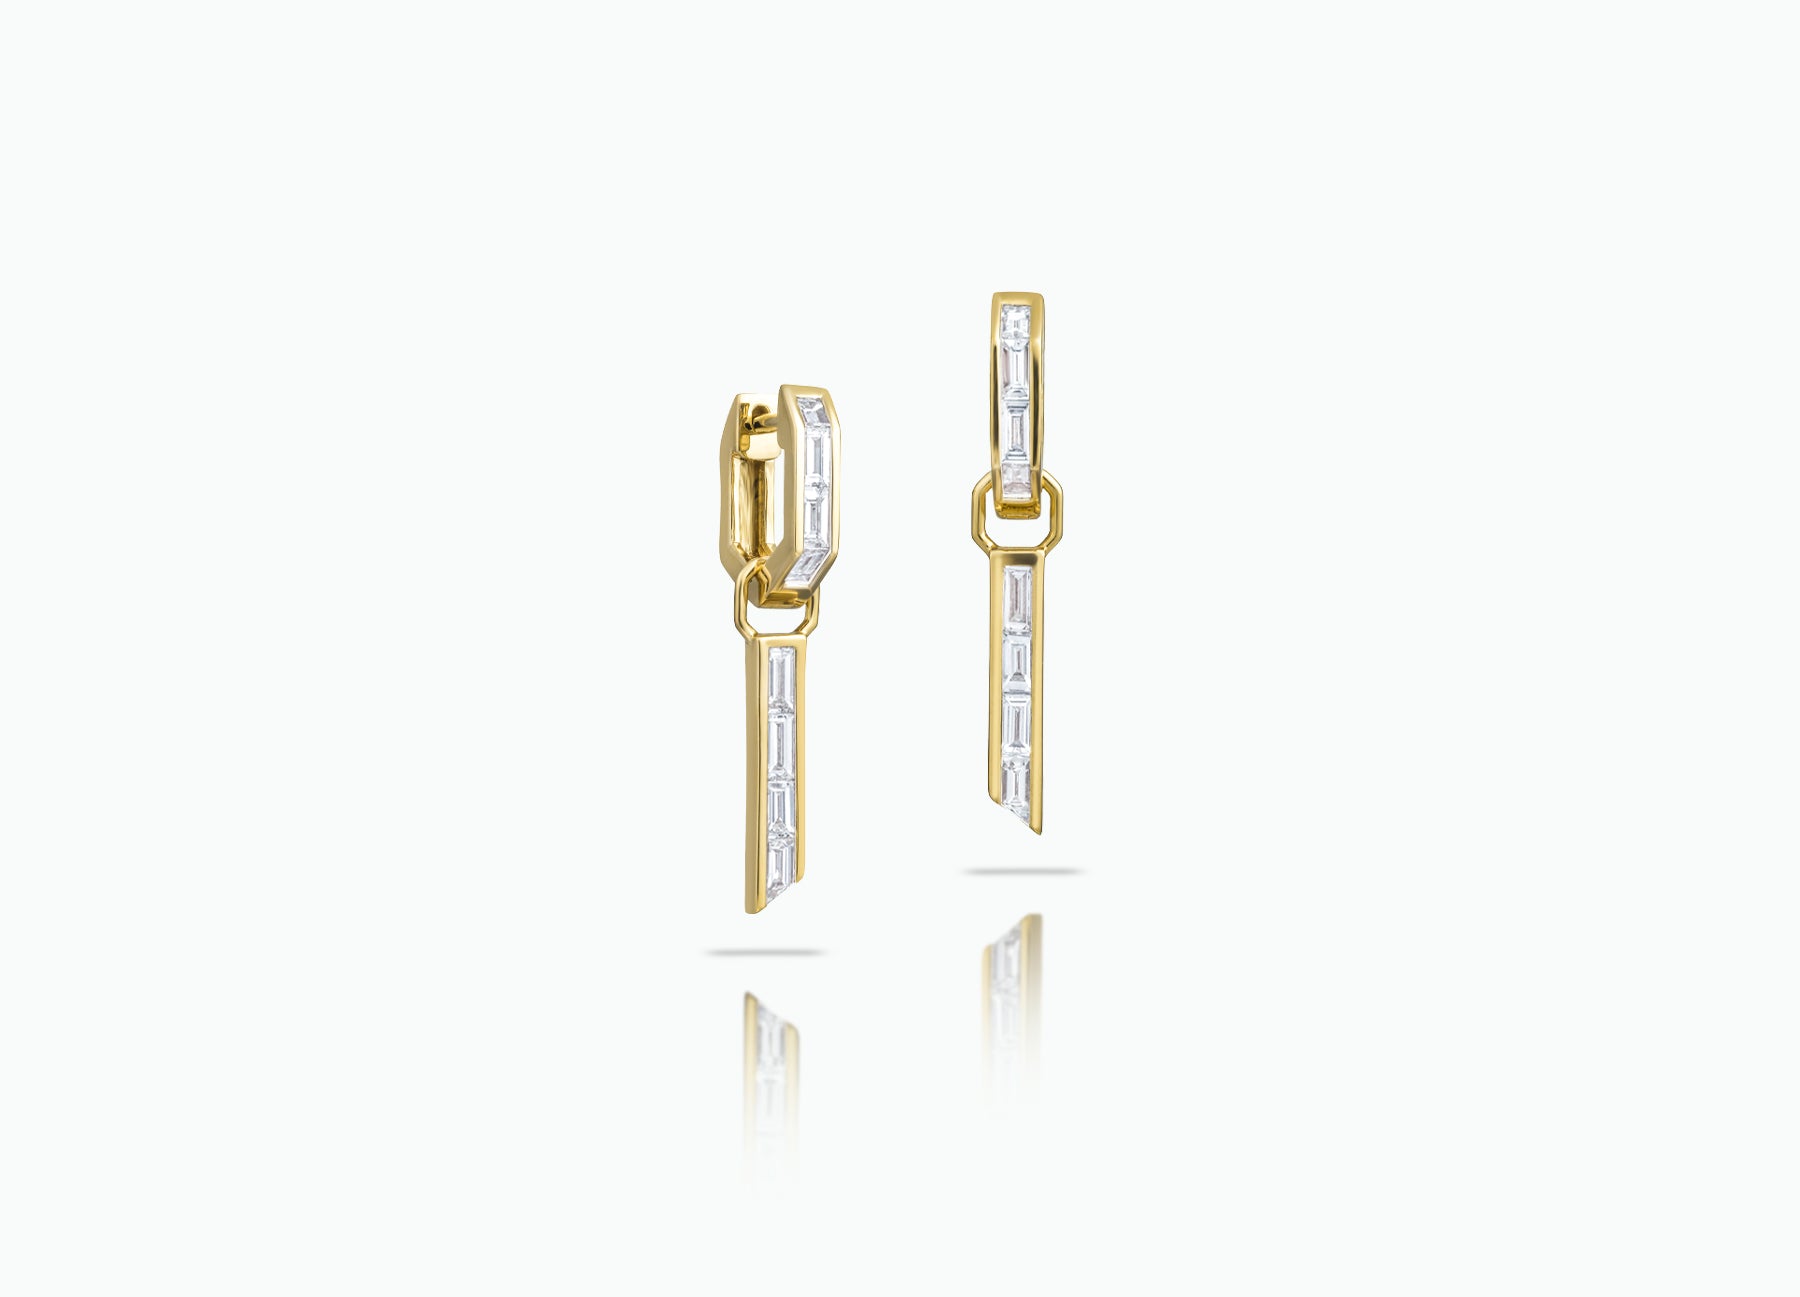 Huggie earrings with detachable Tassle Extensions. Made from rose, yellow or white 18k Gold with baguette-cut GVS white Diamonds.